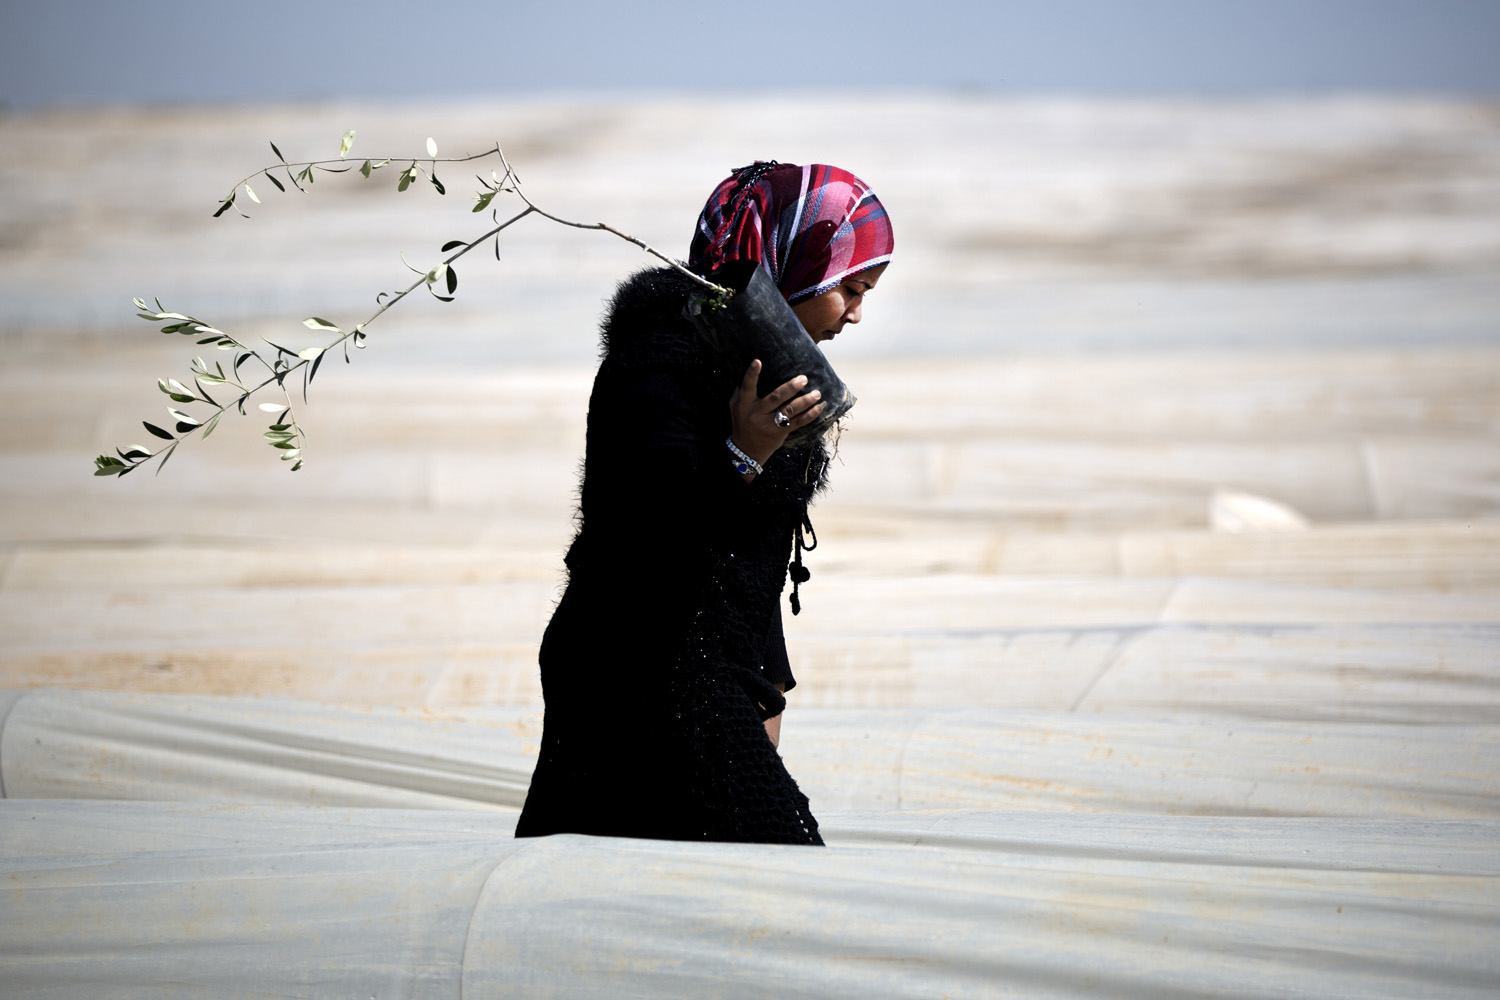 Mar. 29, 2014. A Palestinian carries an olive tree as she walks through rows of greenhouses on  Land Day  during which people traditionally plant olive trees near the Israeli border in Jabalia, in the northern Gaza Strip.